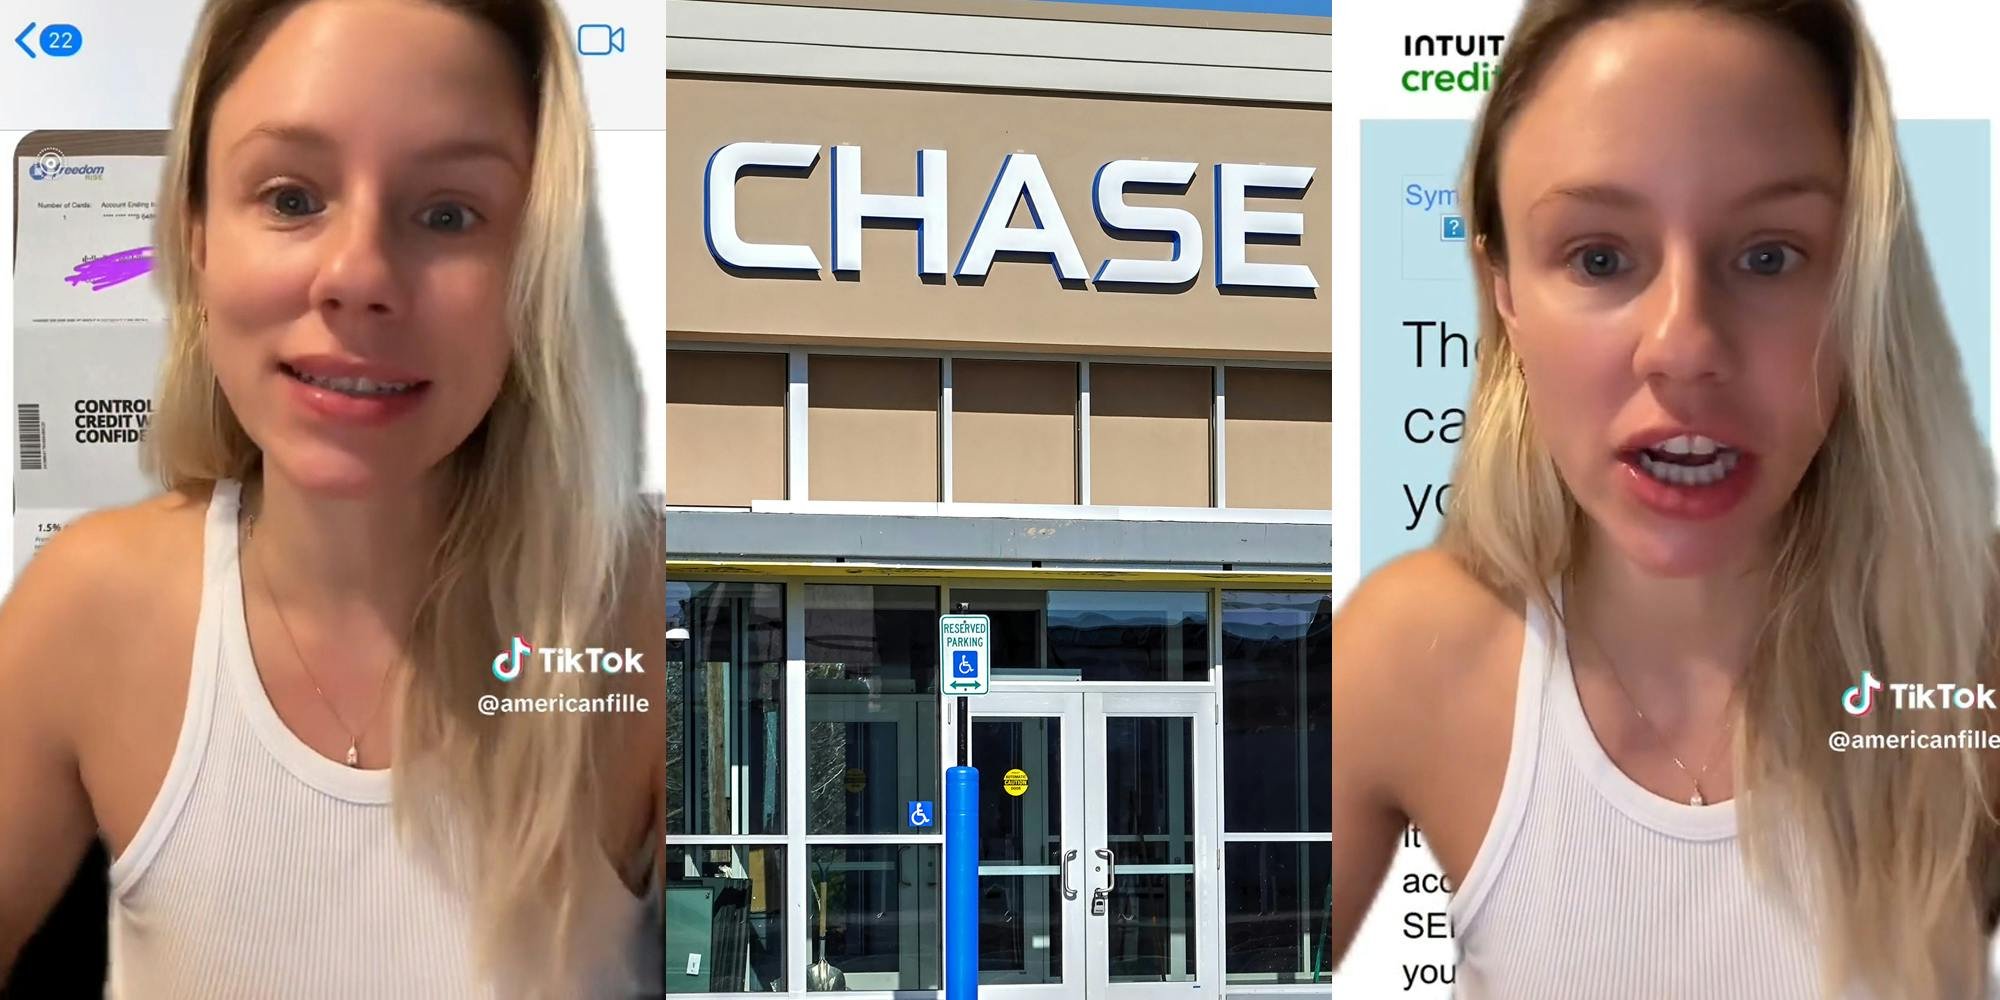 ‘This EXACT thing happened to me with Chase’: Woman says Chase opened credit card in her name without permission